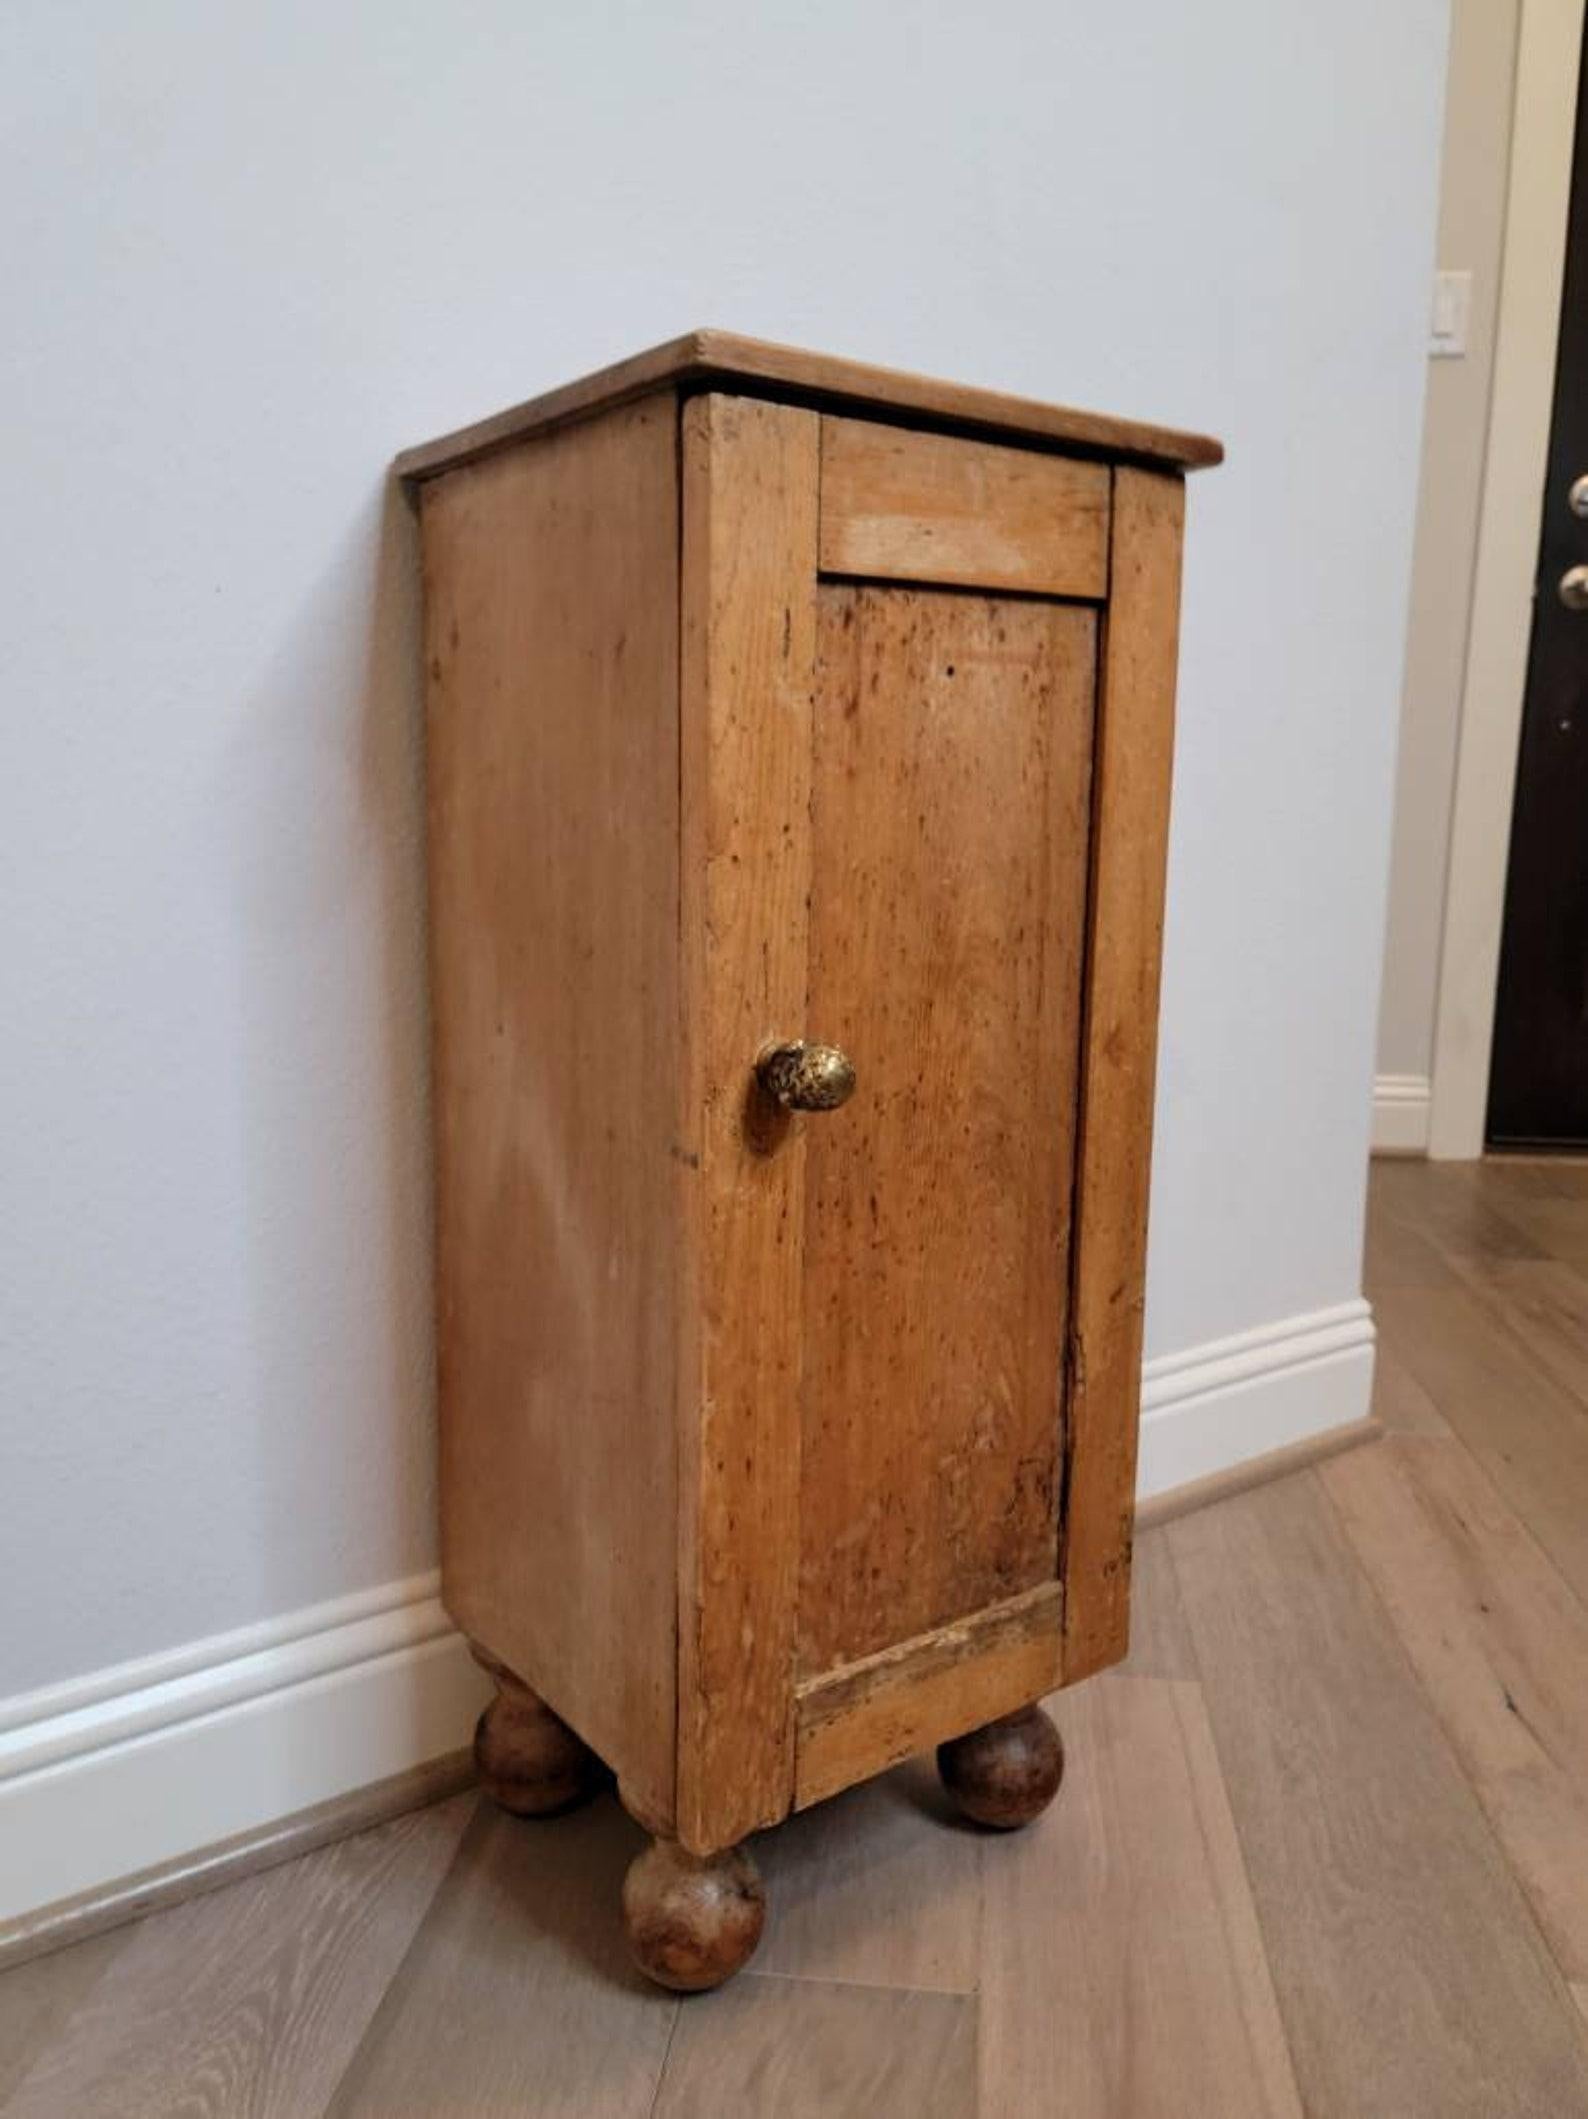 A charming antique English Victorian Country pine cupboard with beautiful patina. circa 1860

Perfectly imperfect, full of the sophisticated antique character and rustic old world charm that makes us love European antiques so much. 

Originating